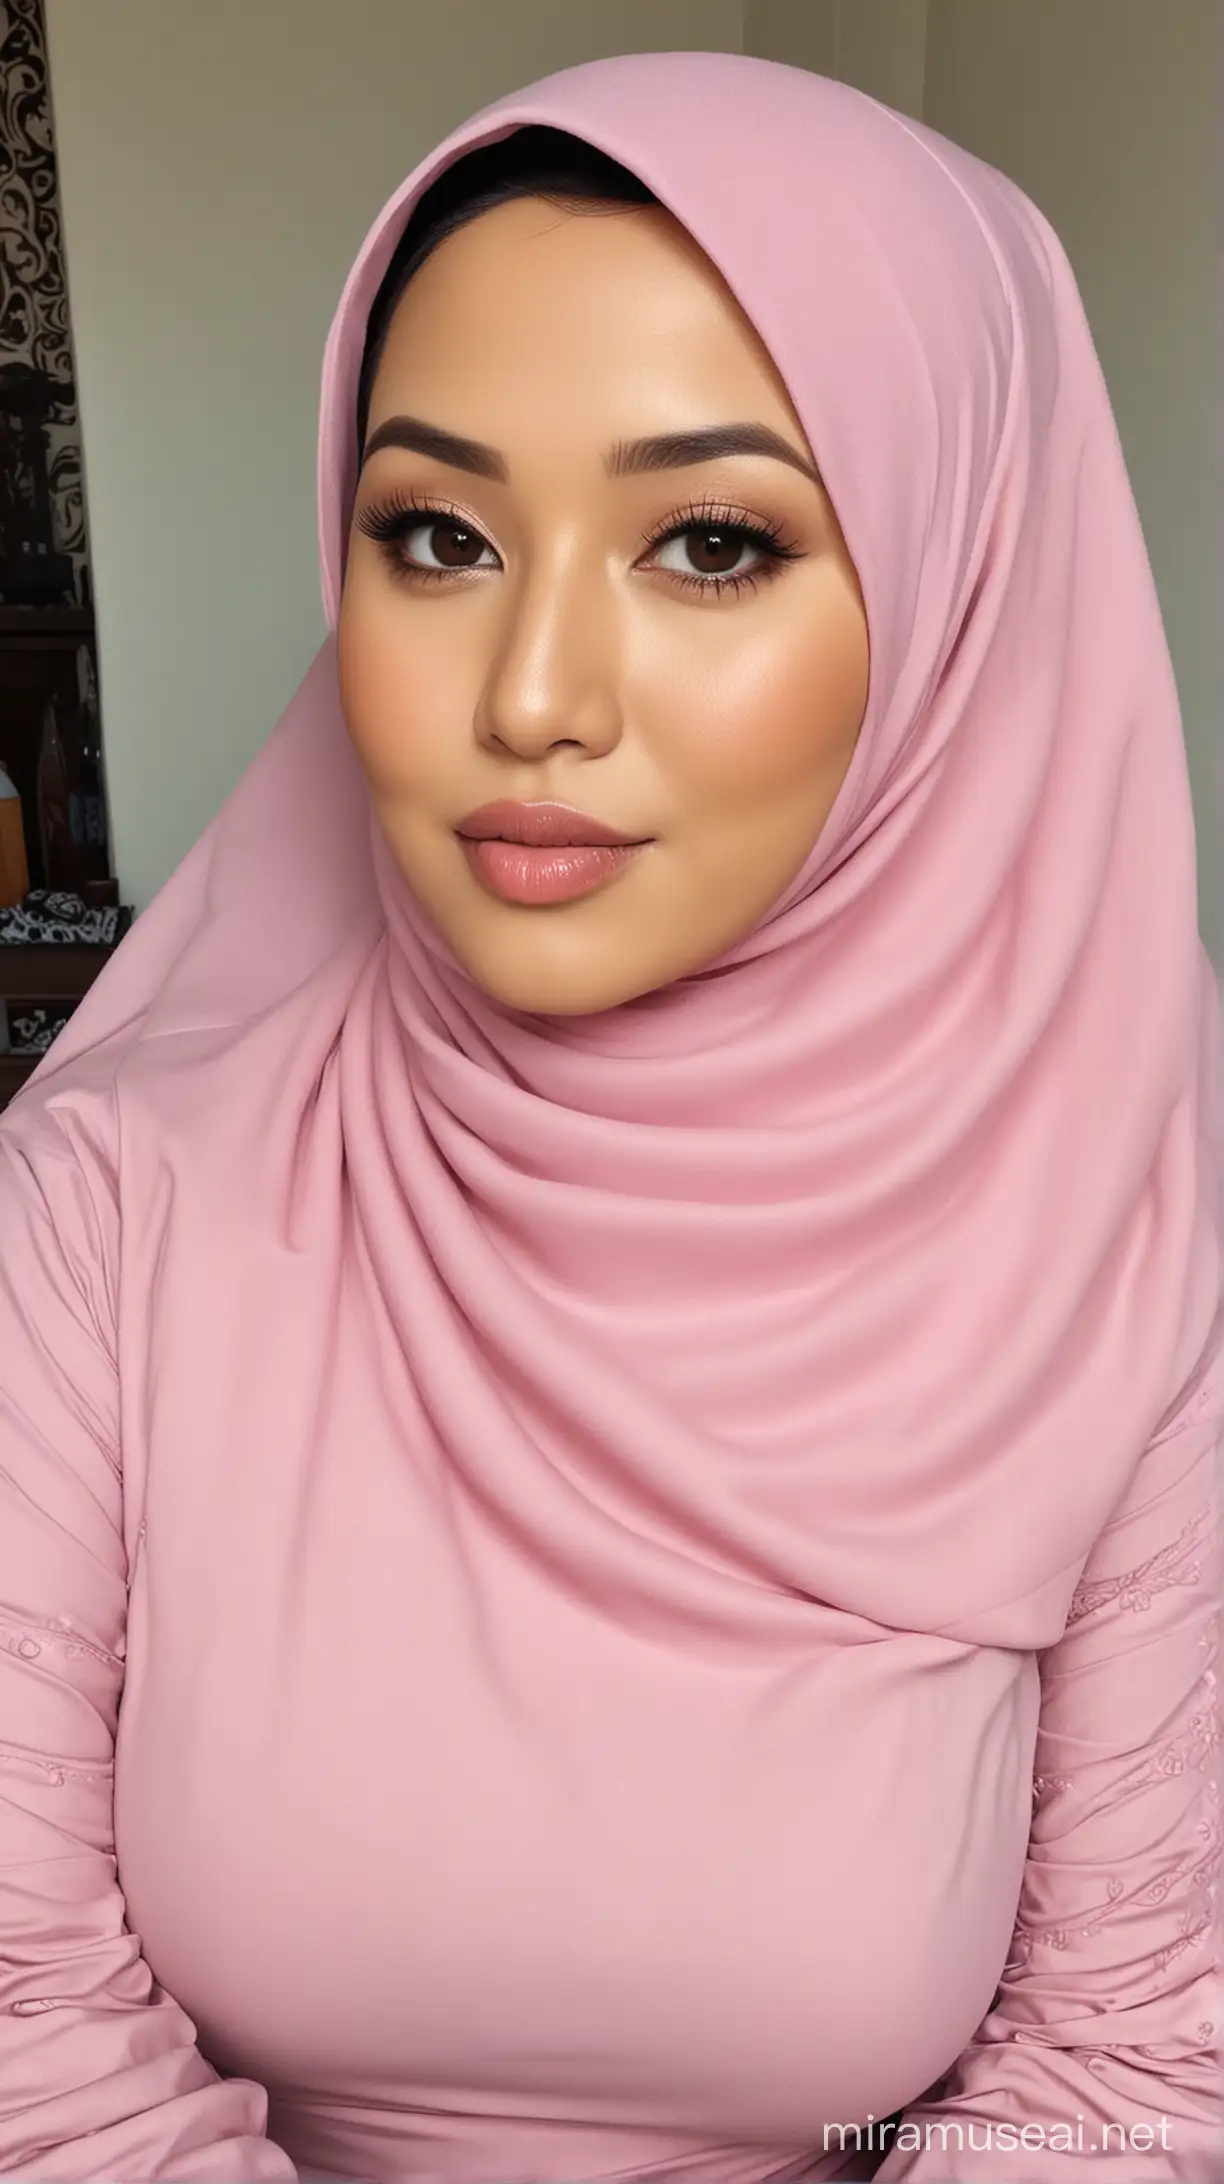 Indonesian Hijab Woman with Stunning Beauty and Curves